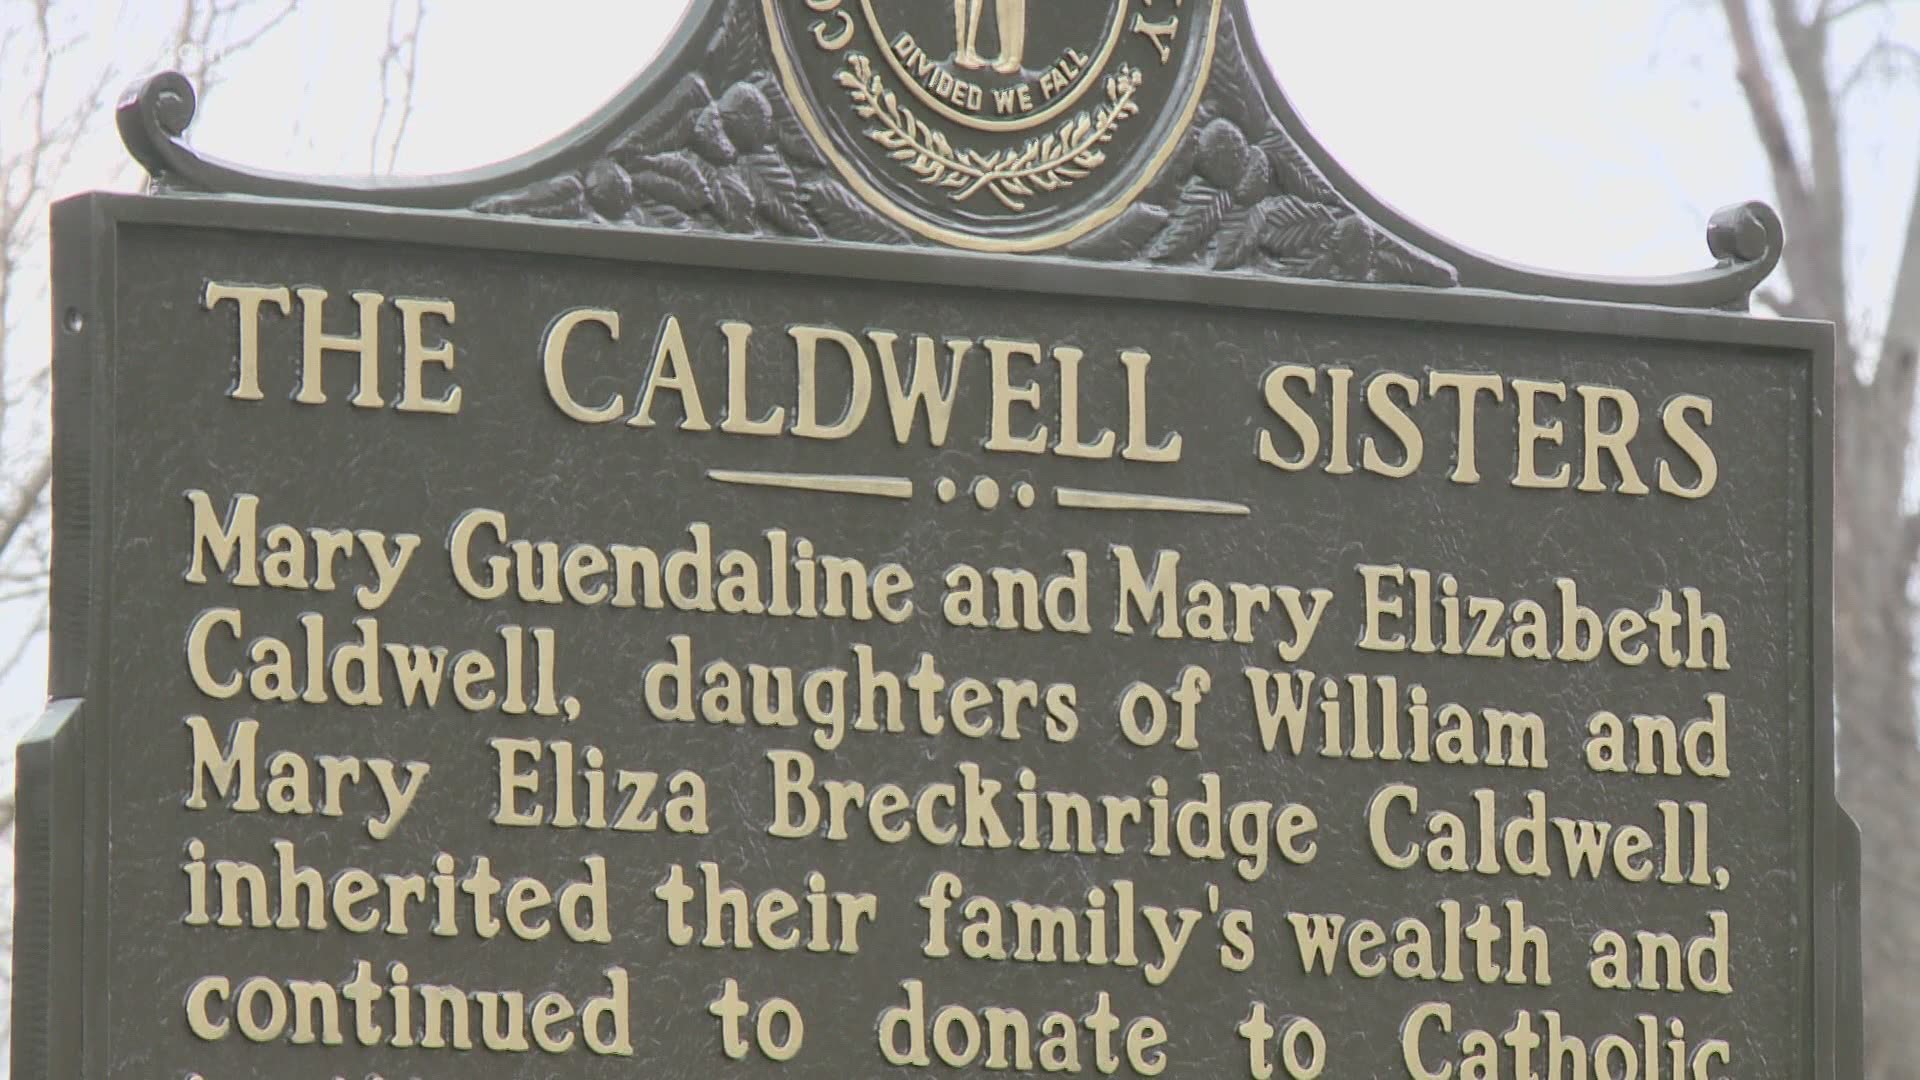 bitter web Verbergen Caldwell Sisters honored with historical marker in Shelby Park | whas11.com